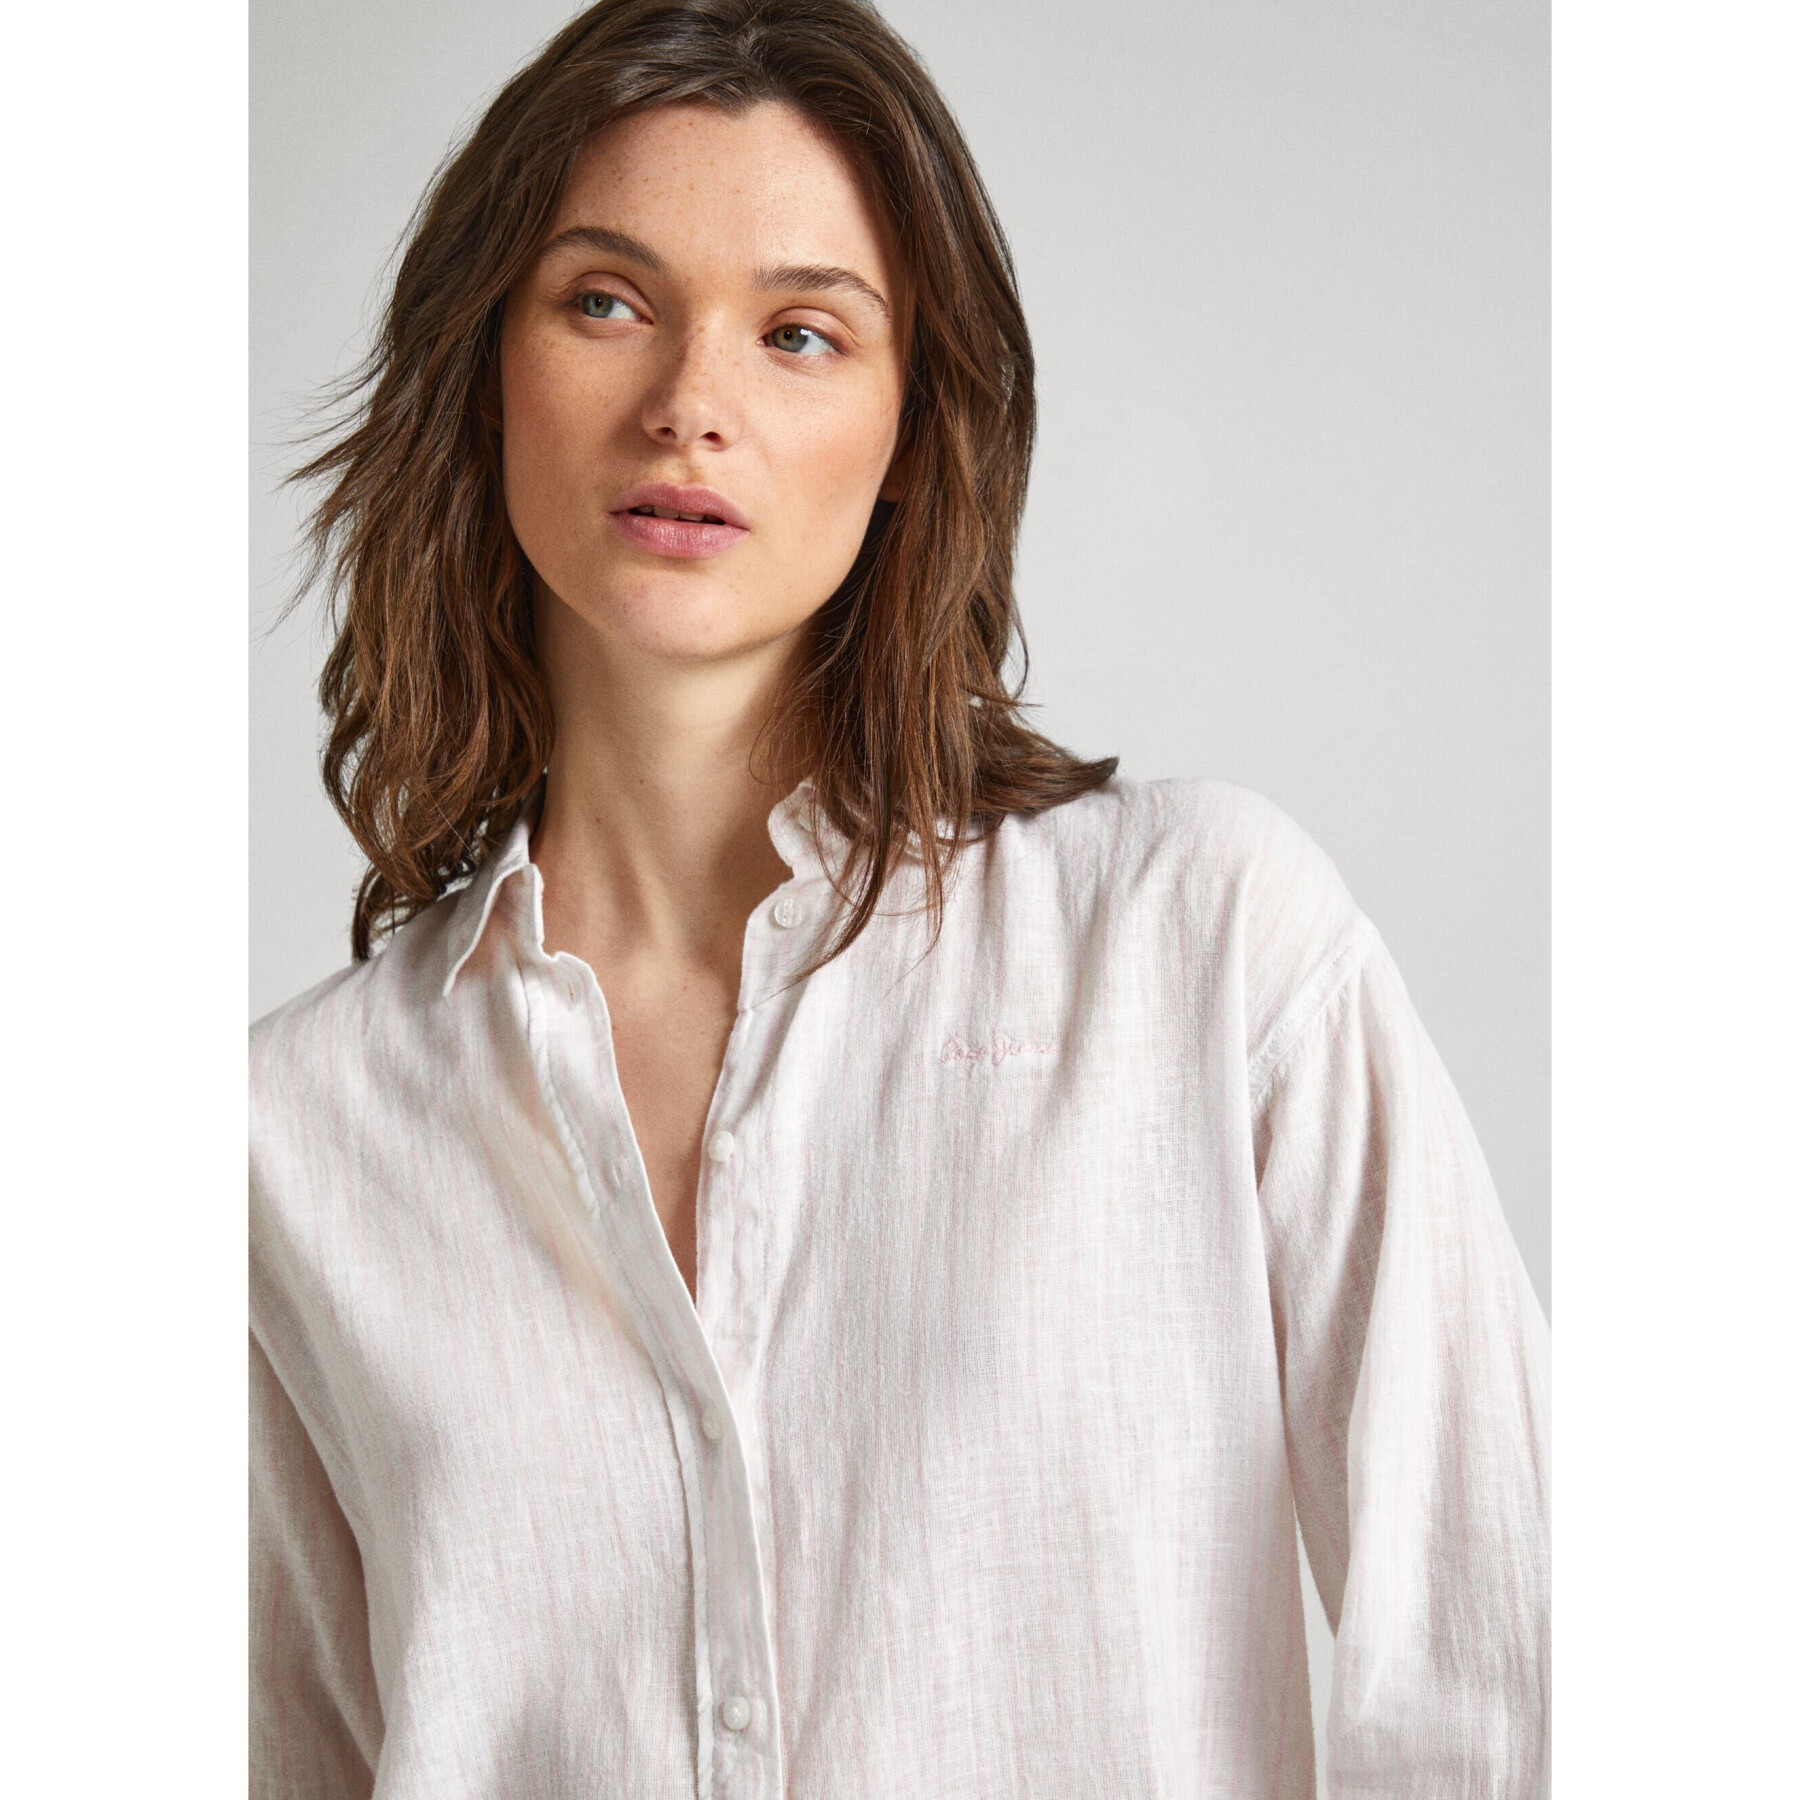 Blusa de mujer Pepe Jeans Polly